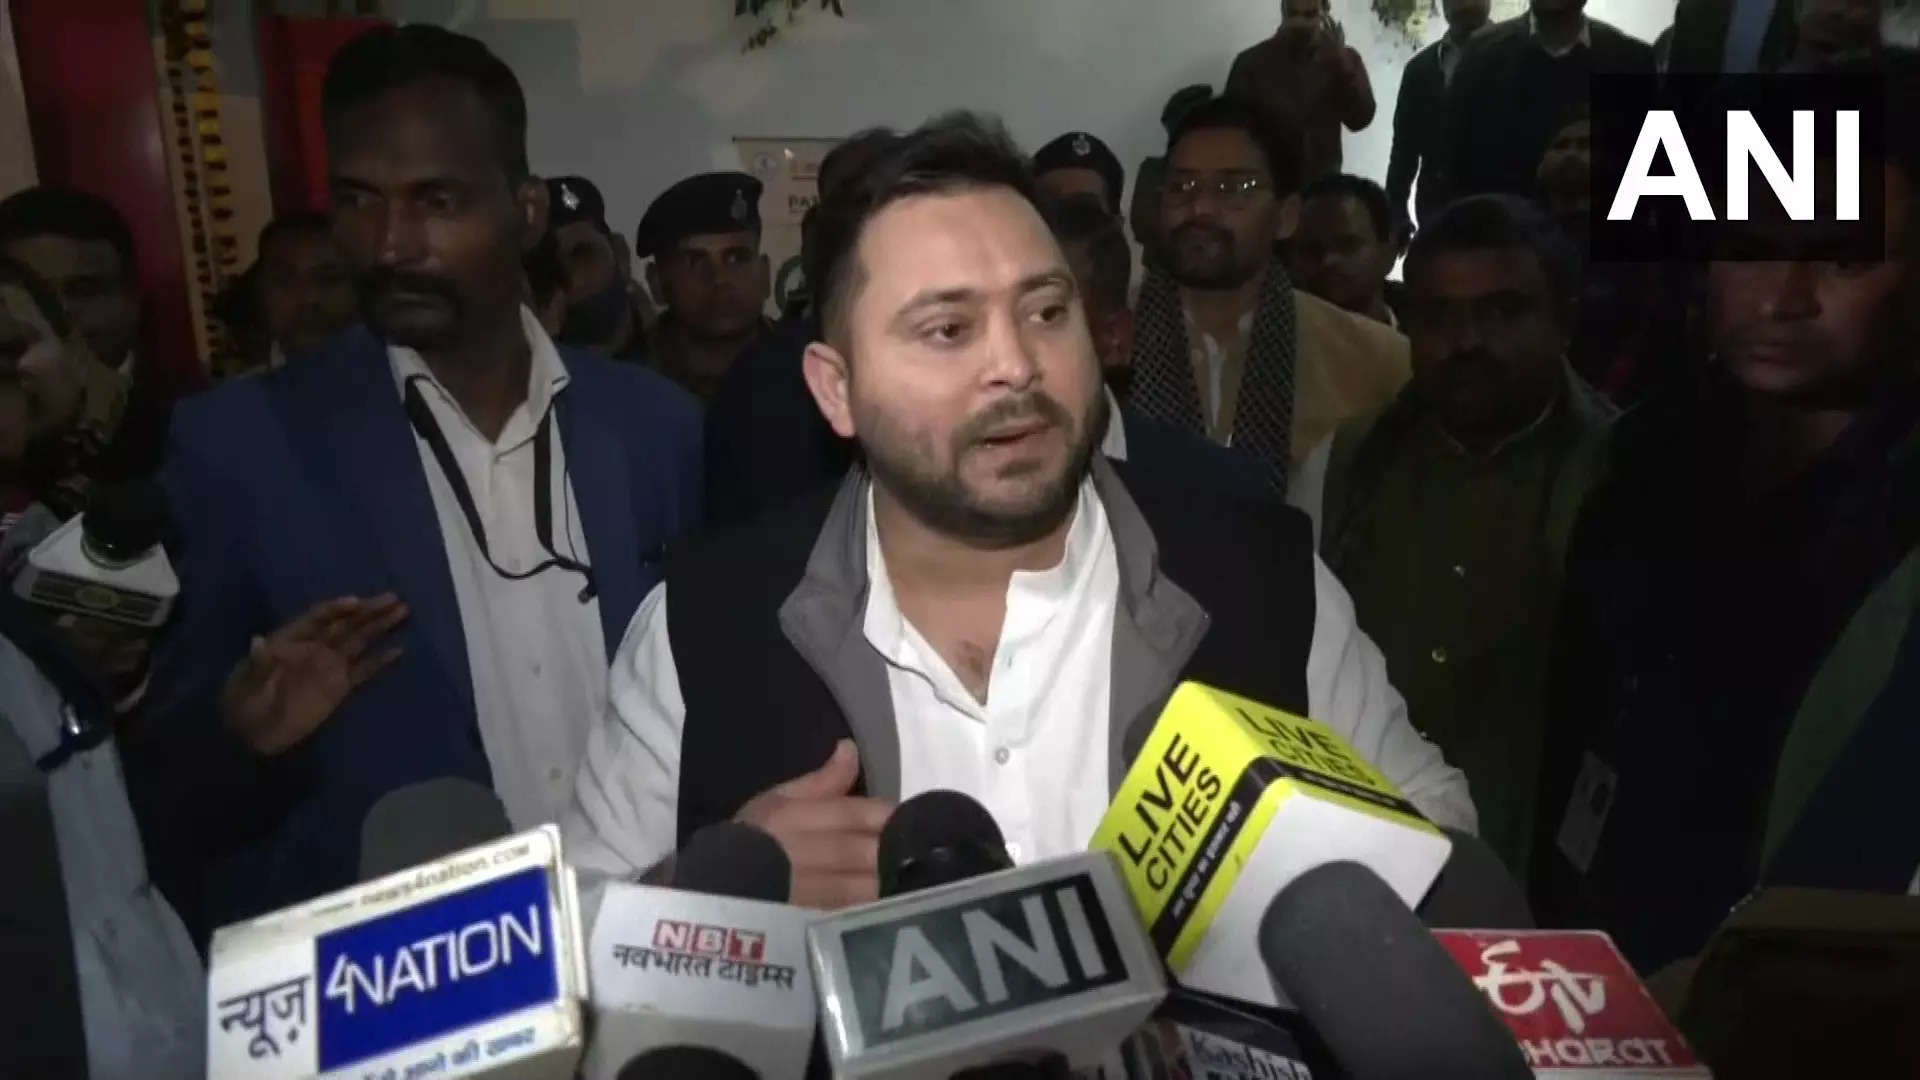 In his response to the allegations, Tejashwi Yadav said: "It is a propaganda running against us. Everyone knows who is setting propaganda and news channels are executing it. They do not see how we are giving jobs to people of Bihar.